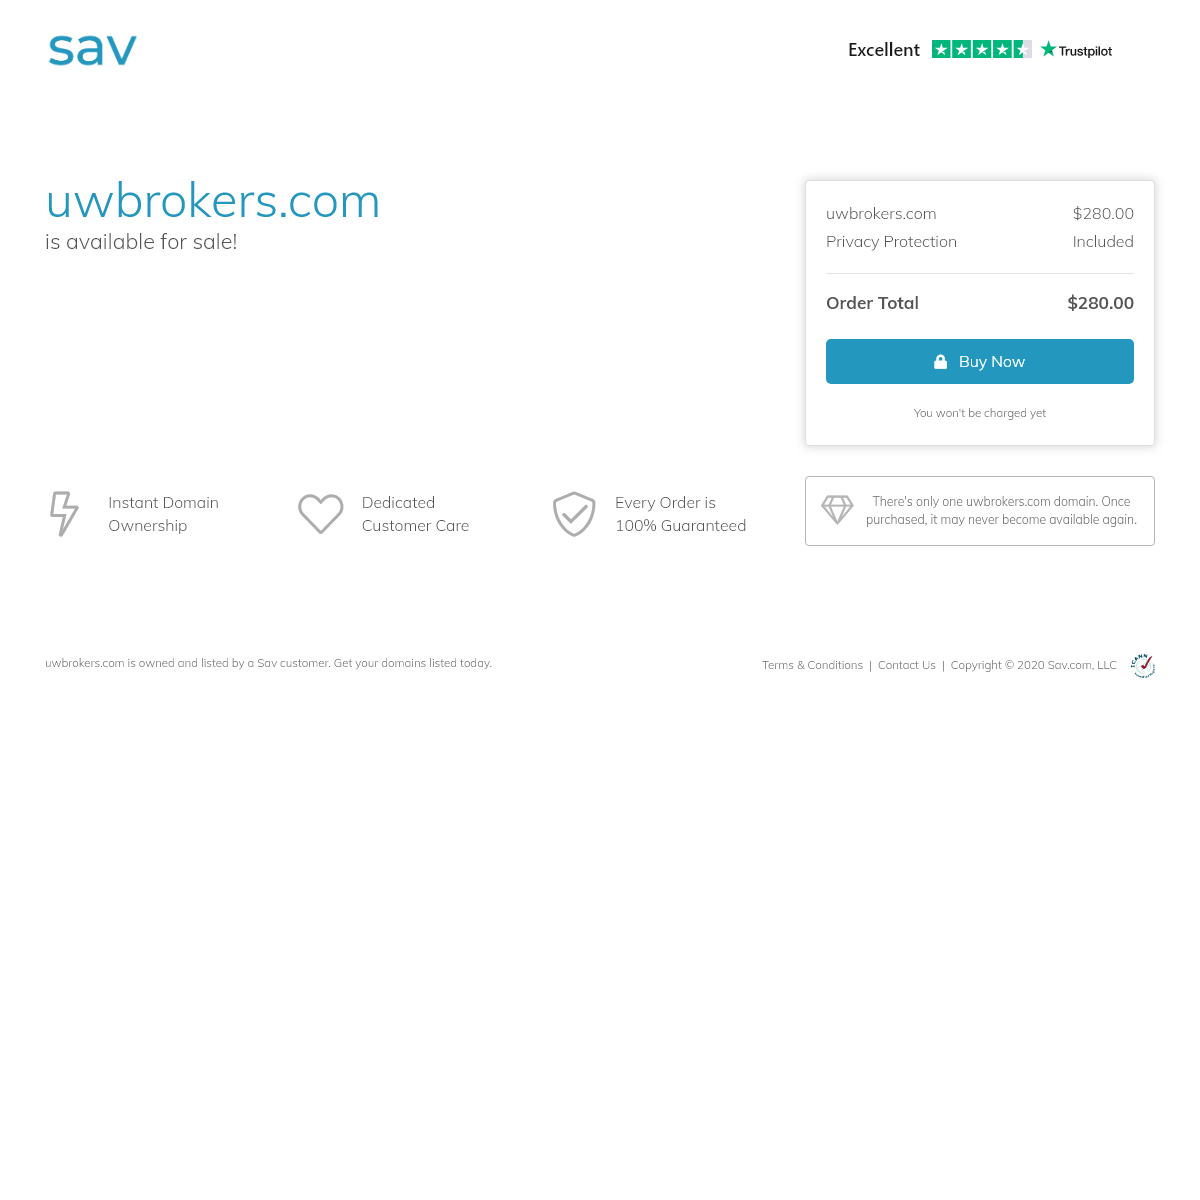 A complete backup of uwbrokers.com